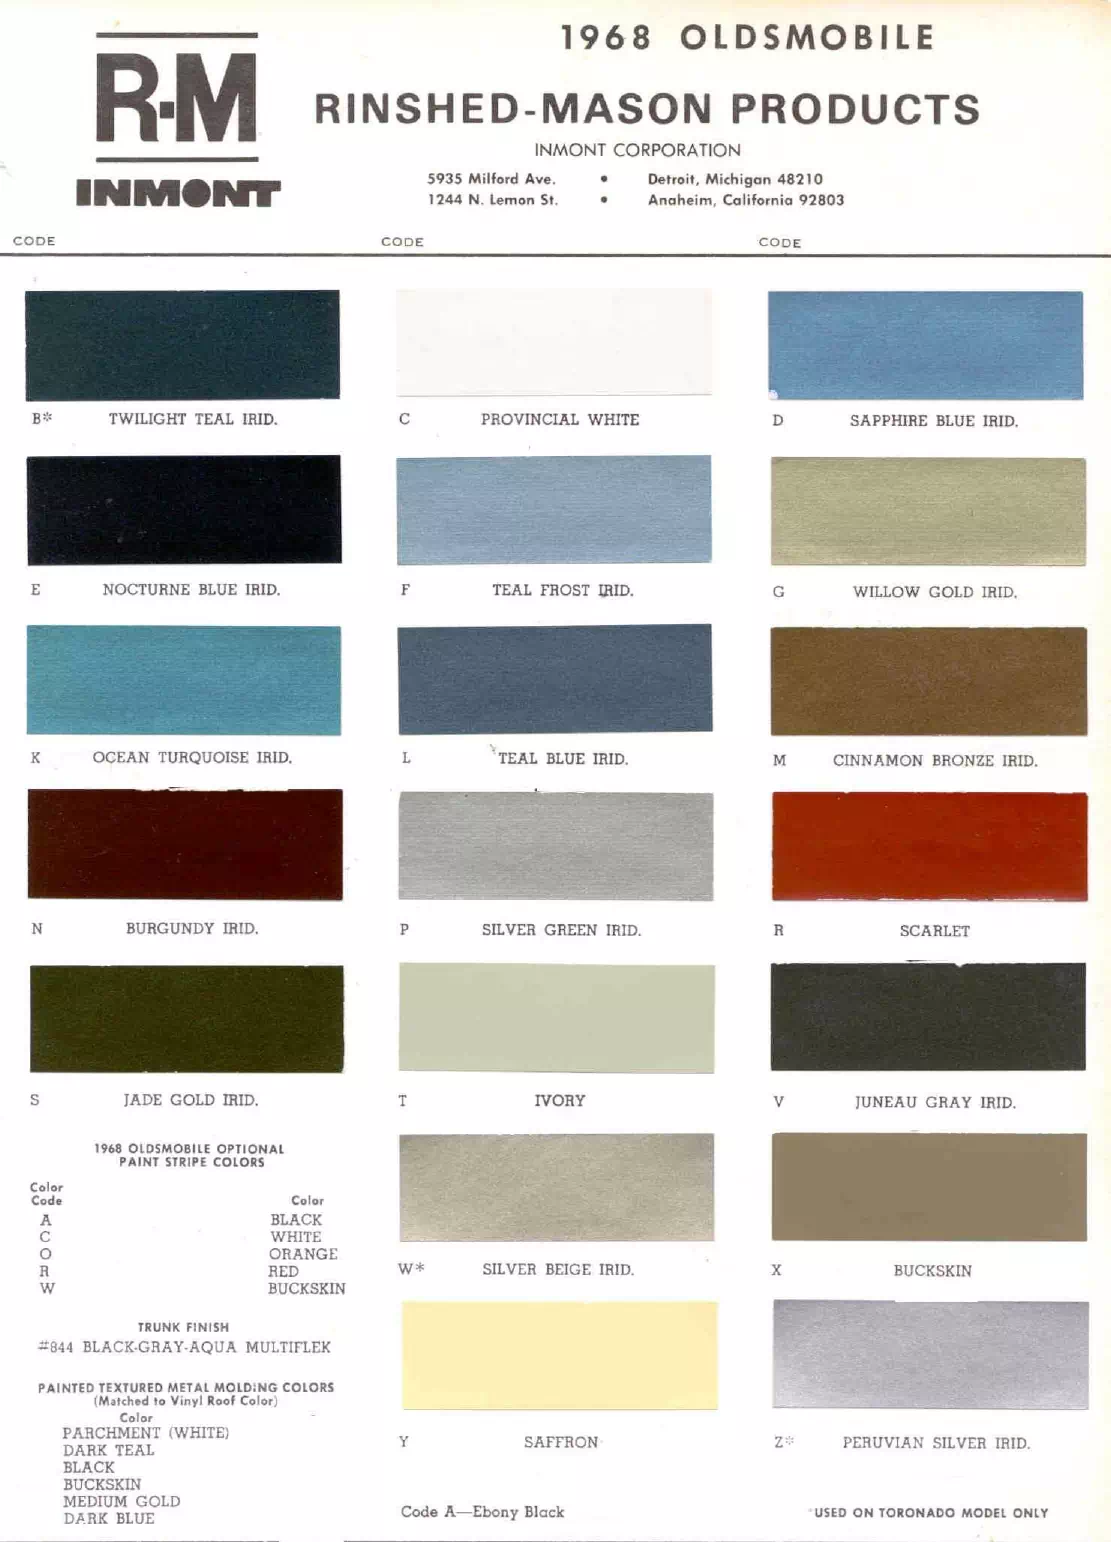 colors and color codes showing the ordering coded for  oldsmobile vehicles